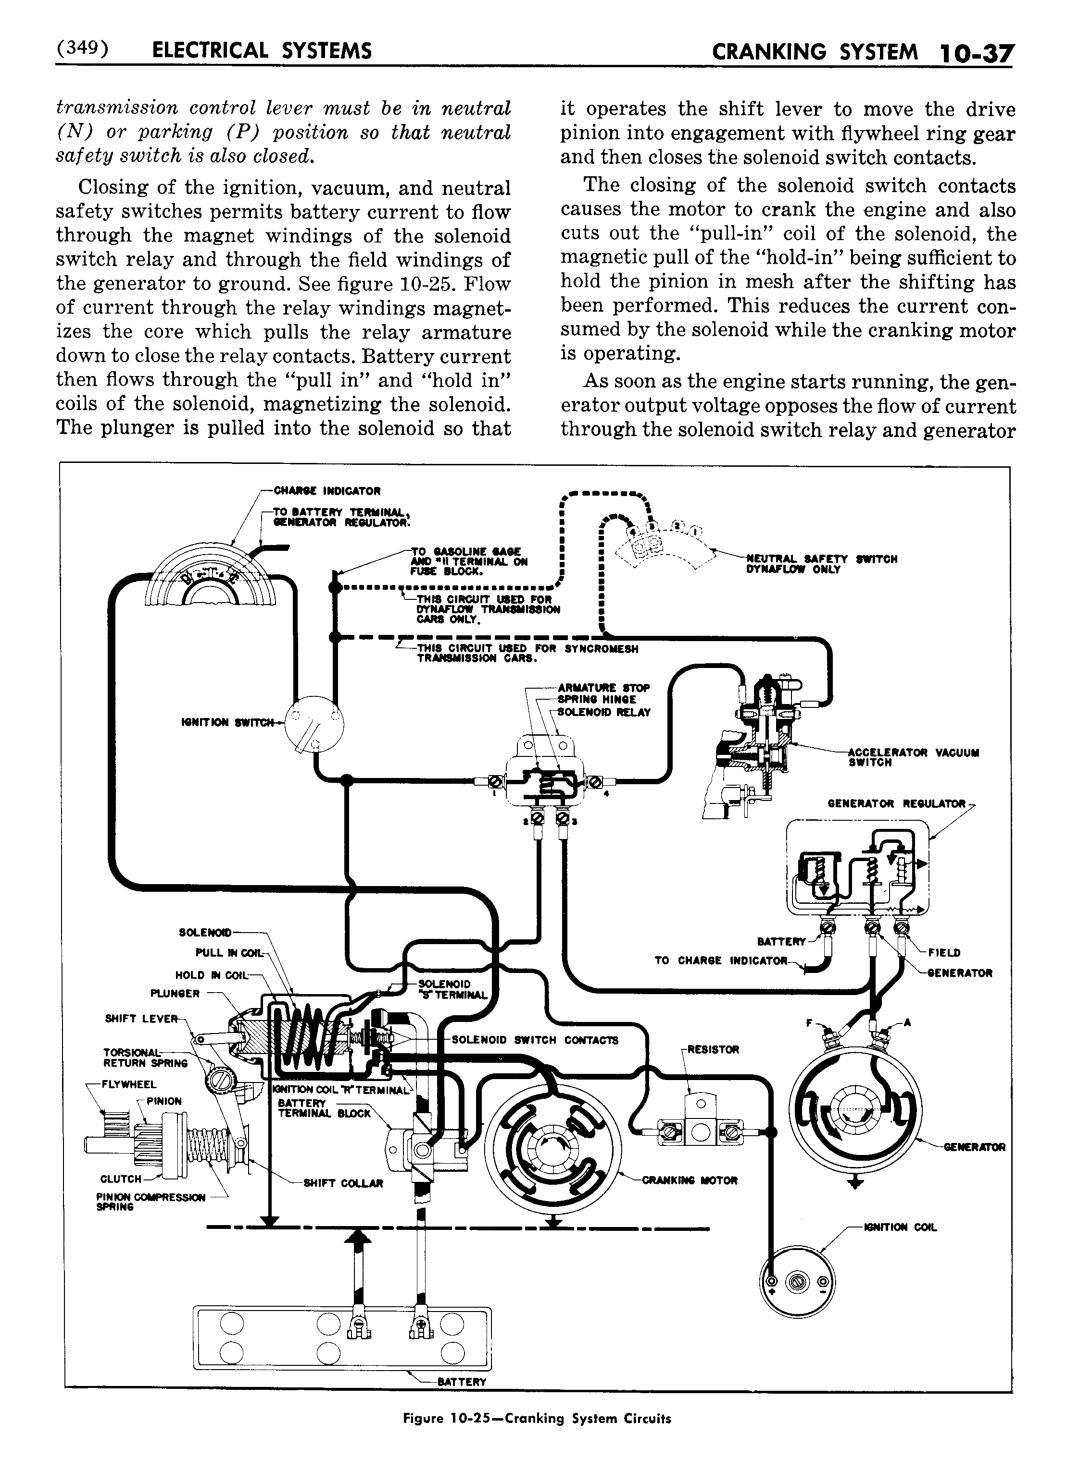 n_11 1954 Buick Shop Manual - Electrical Systems-037-037.jpg